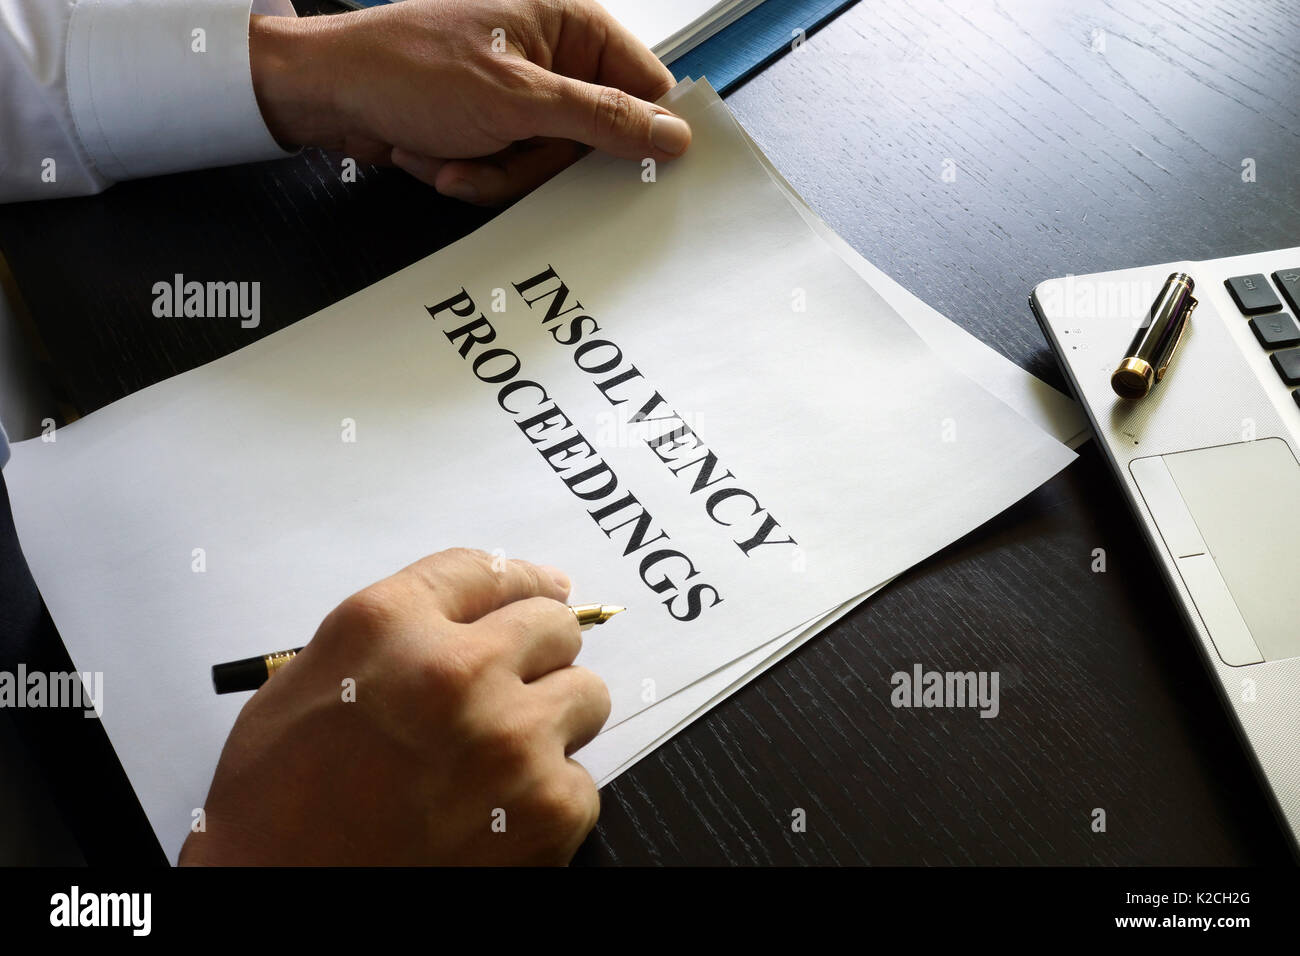 Document with title insolvency proceedings on a desk. Stock Photo